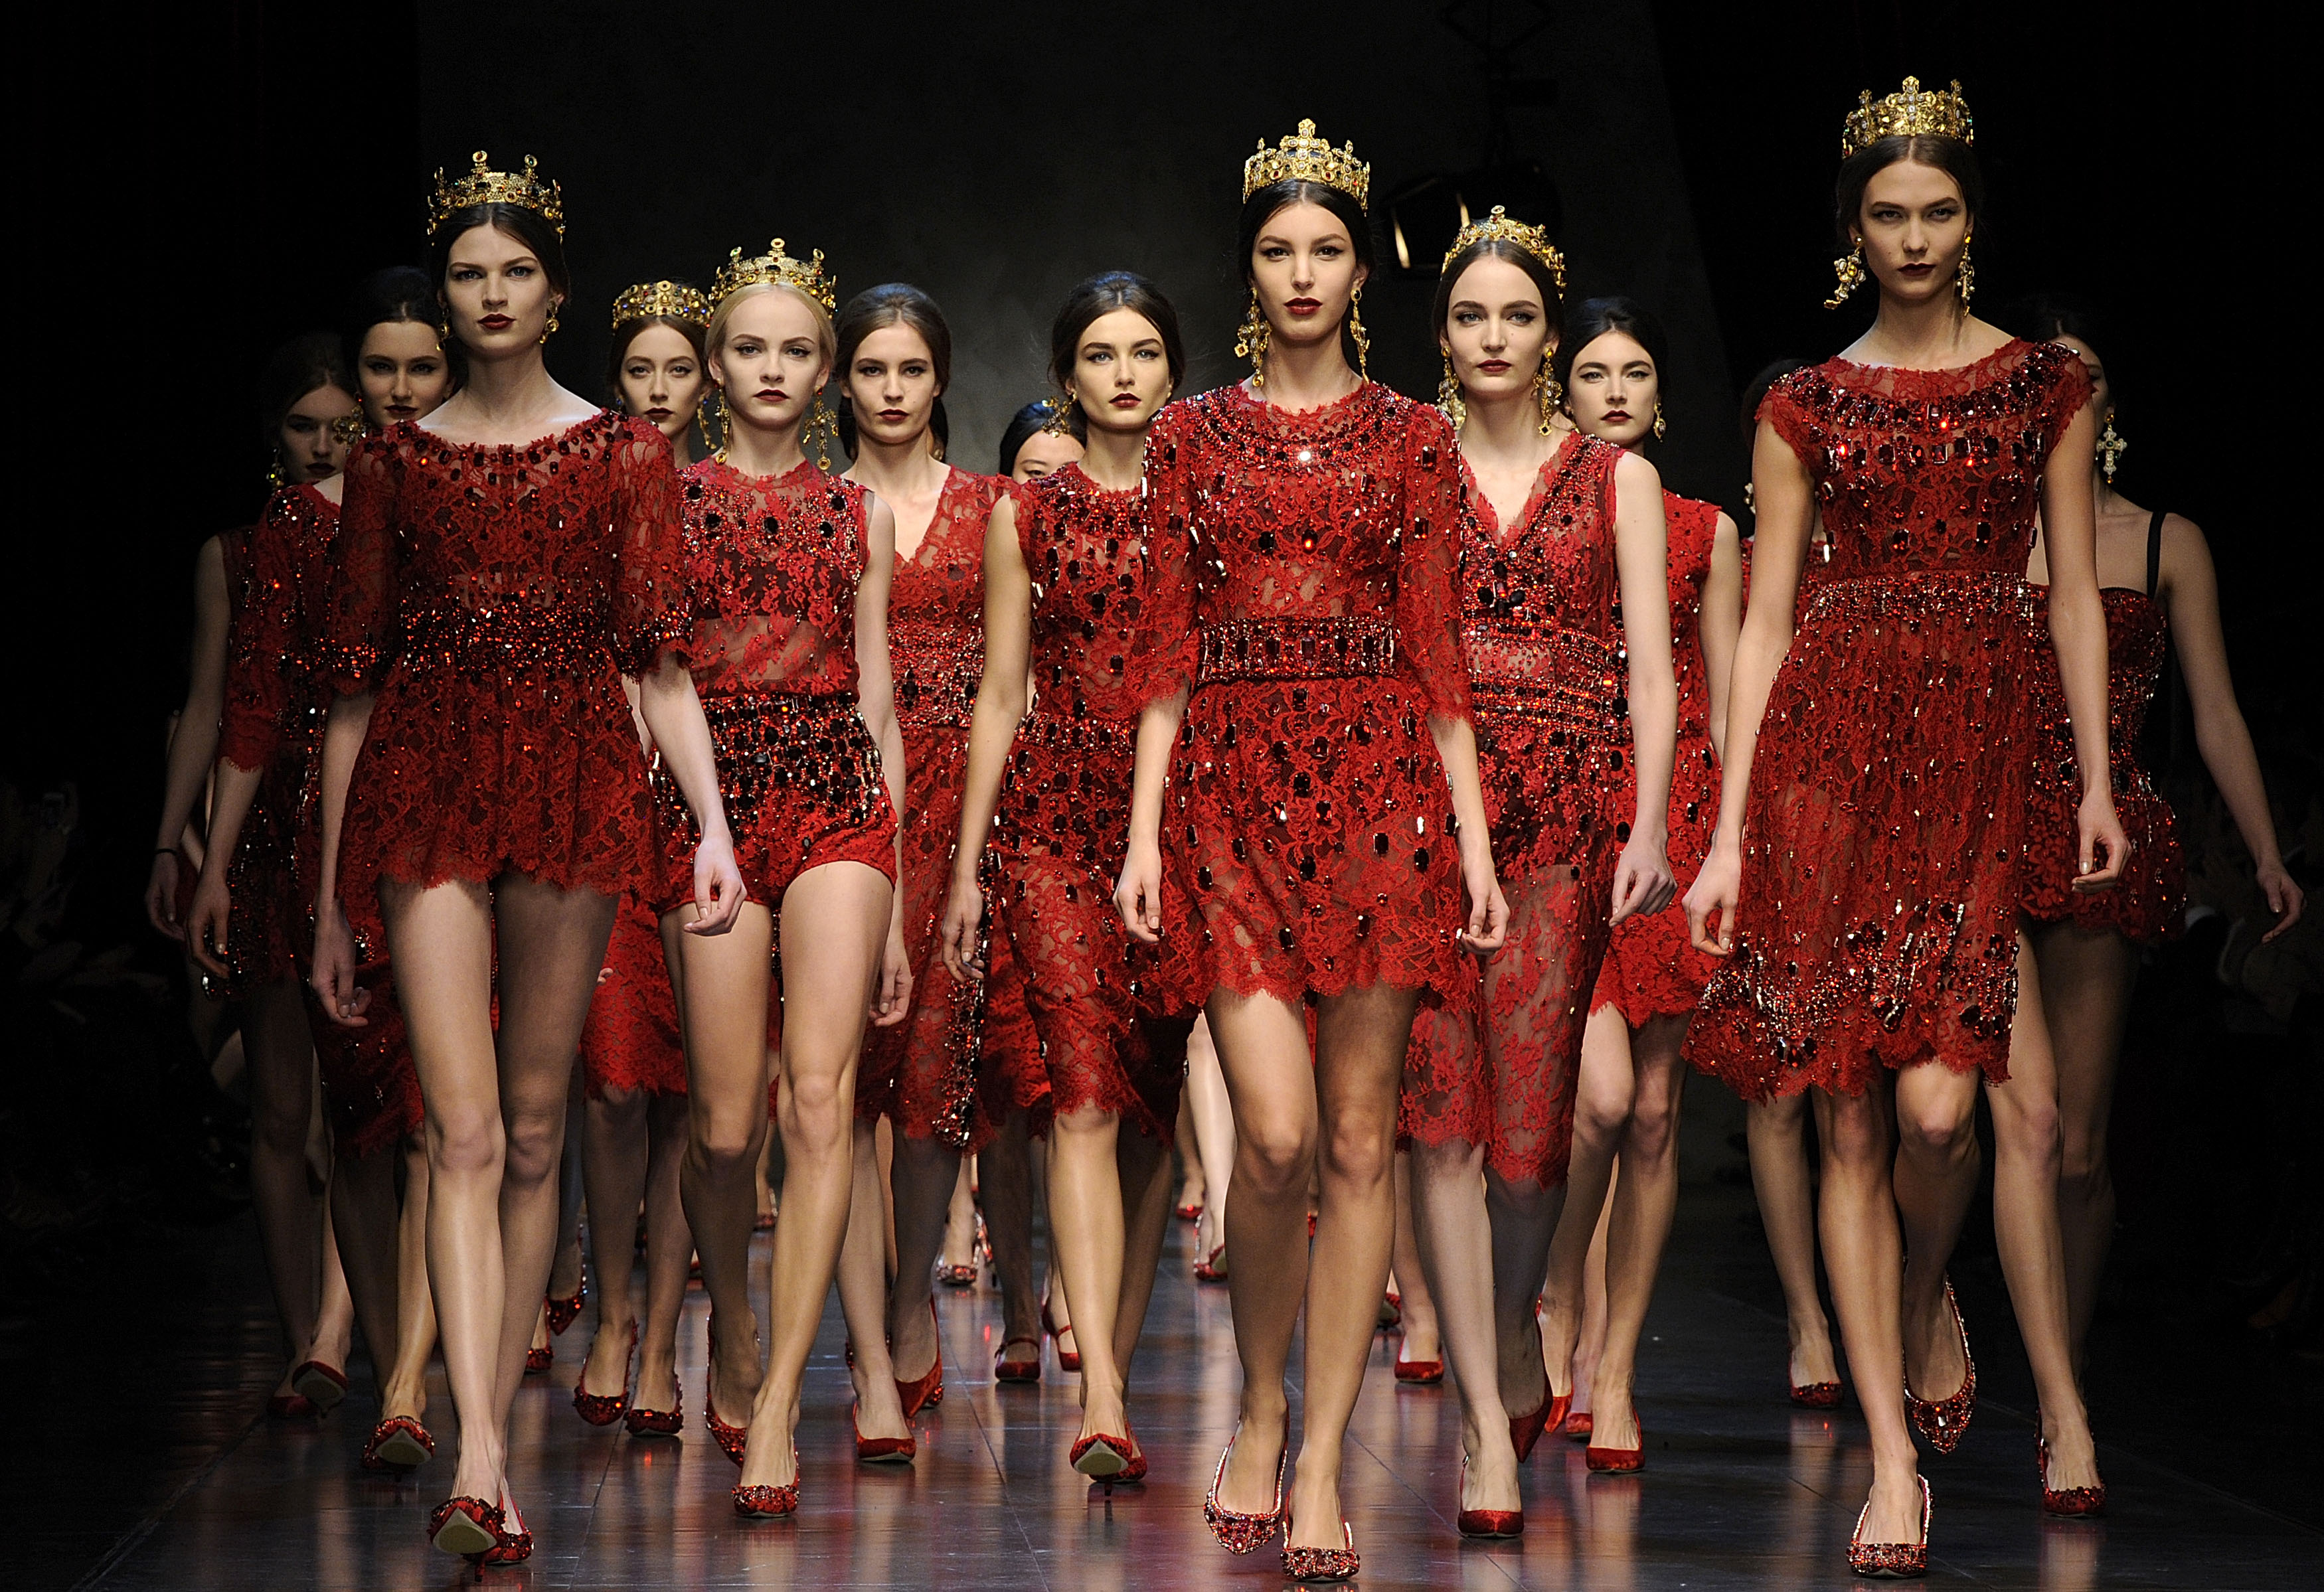 Wallpapers Dolce Gabbana Italy Fashion on the desktop